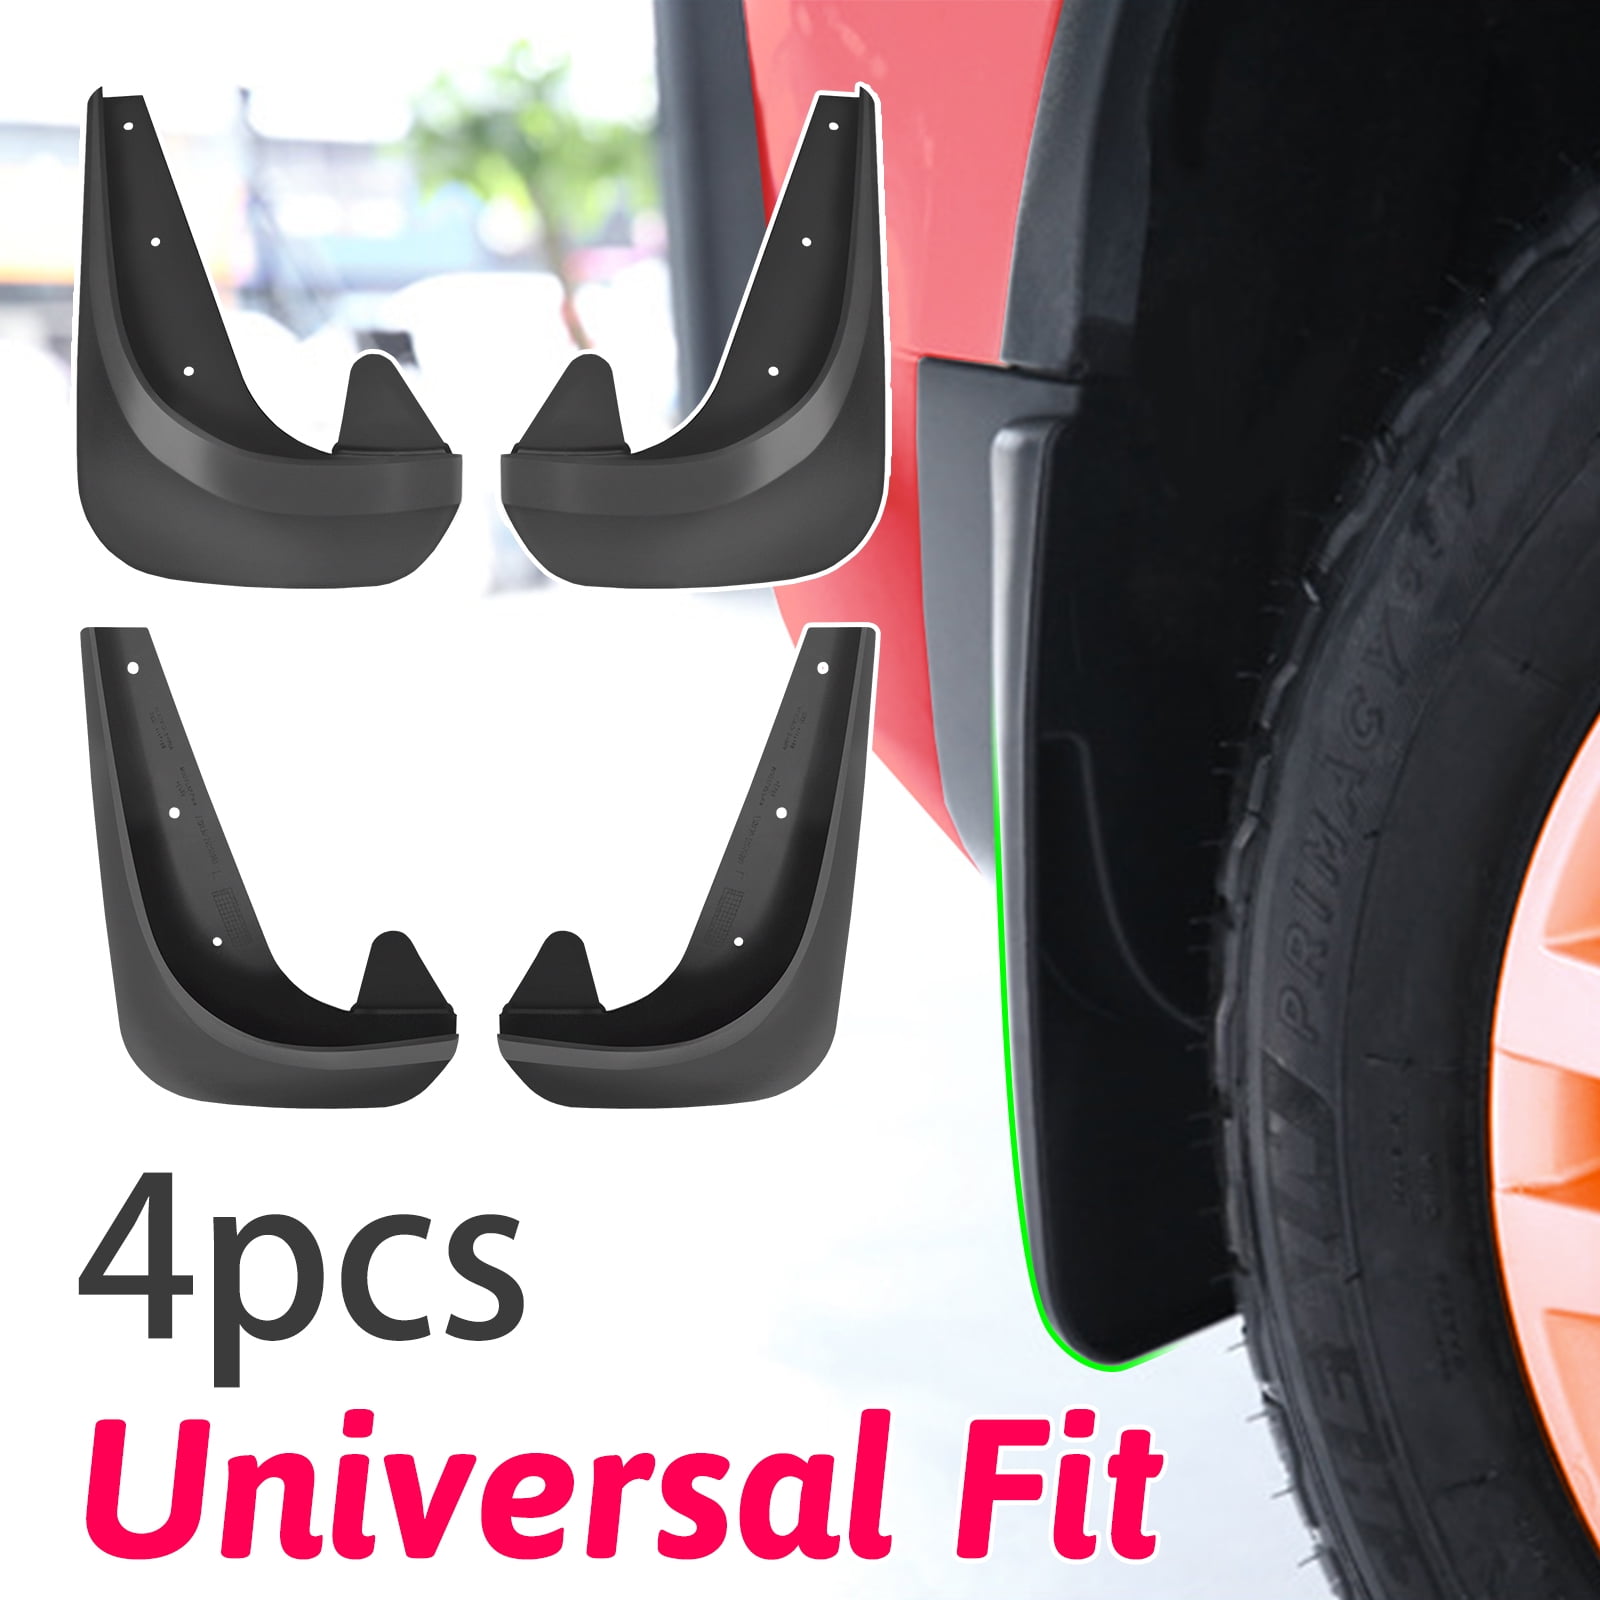 4pcs Universal Car Front and Rear Fenders, EEEkit Car Mud Flaps, Auto  Splash Guards Fit for a Variety of Vehicles with Flaps Approximately 9.85 x  7.10inch 